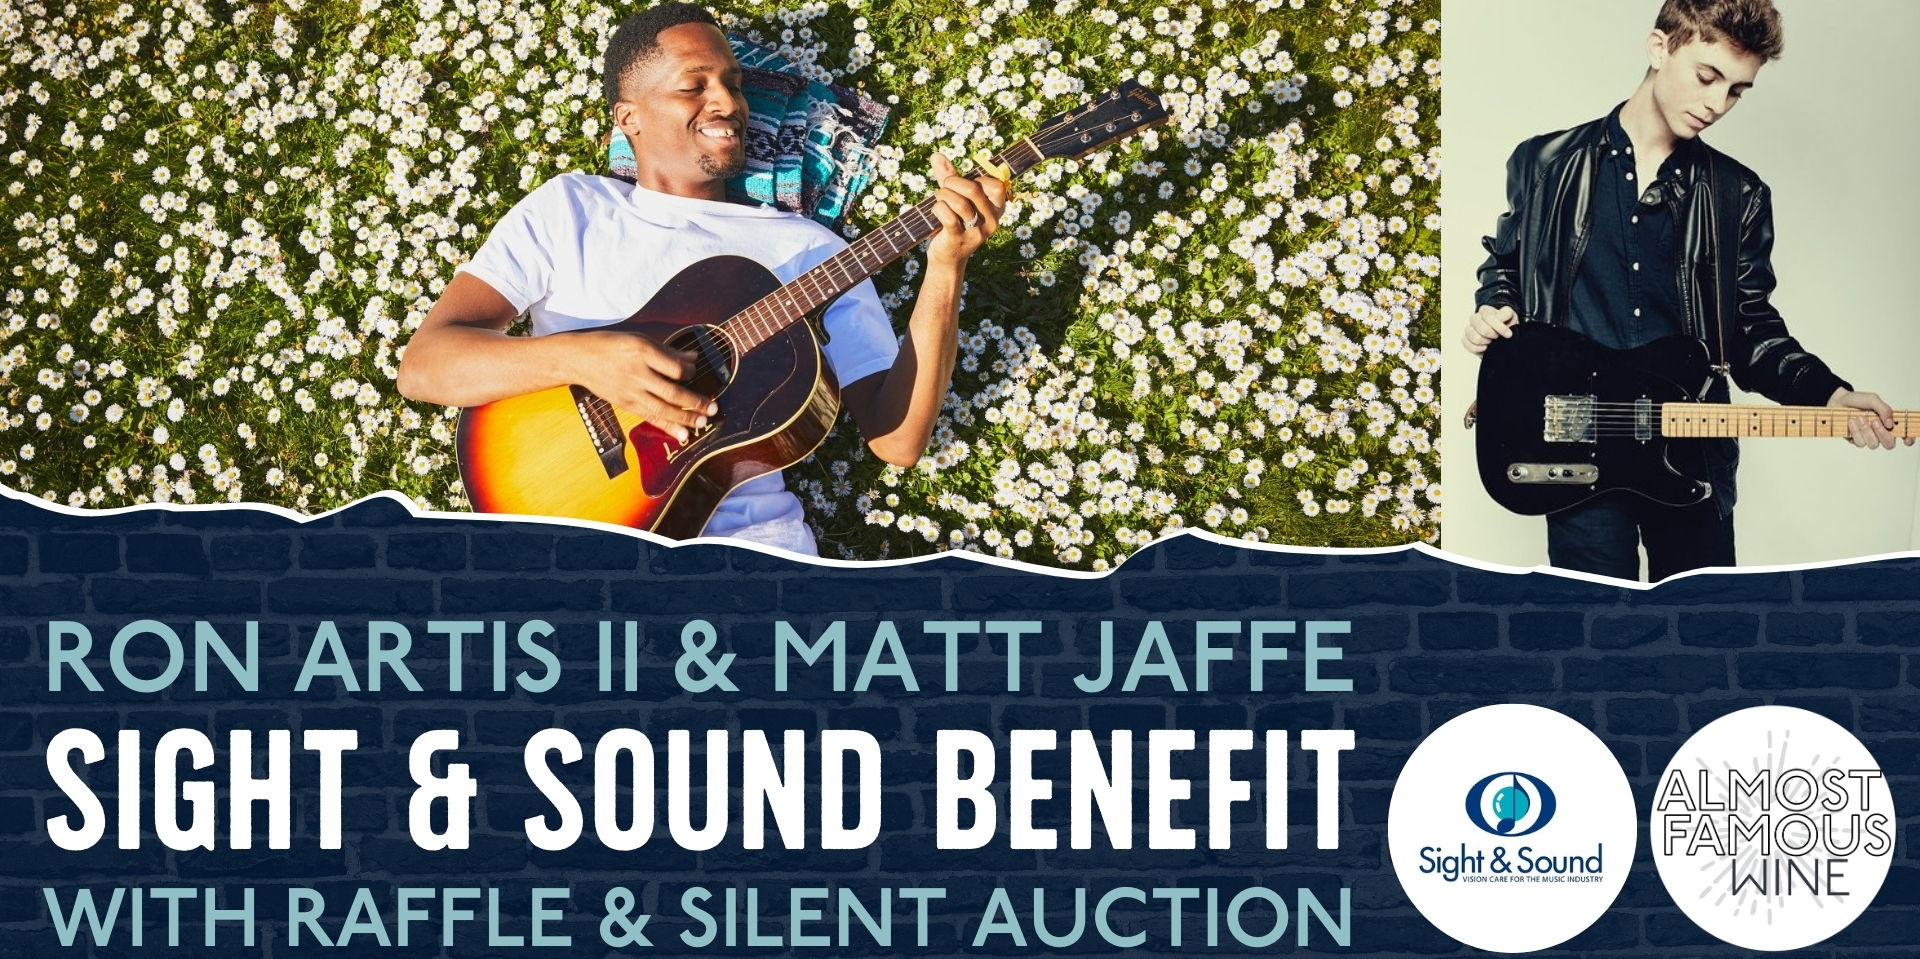 Sight & Sound Benefit Show with Ron Artis II and Matt Jaffe promotional image